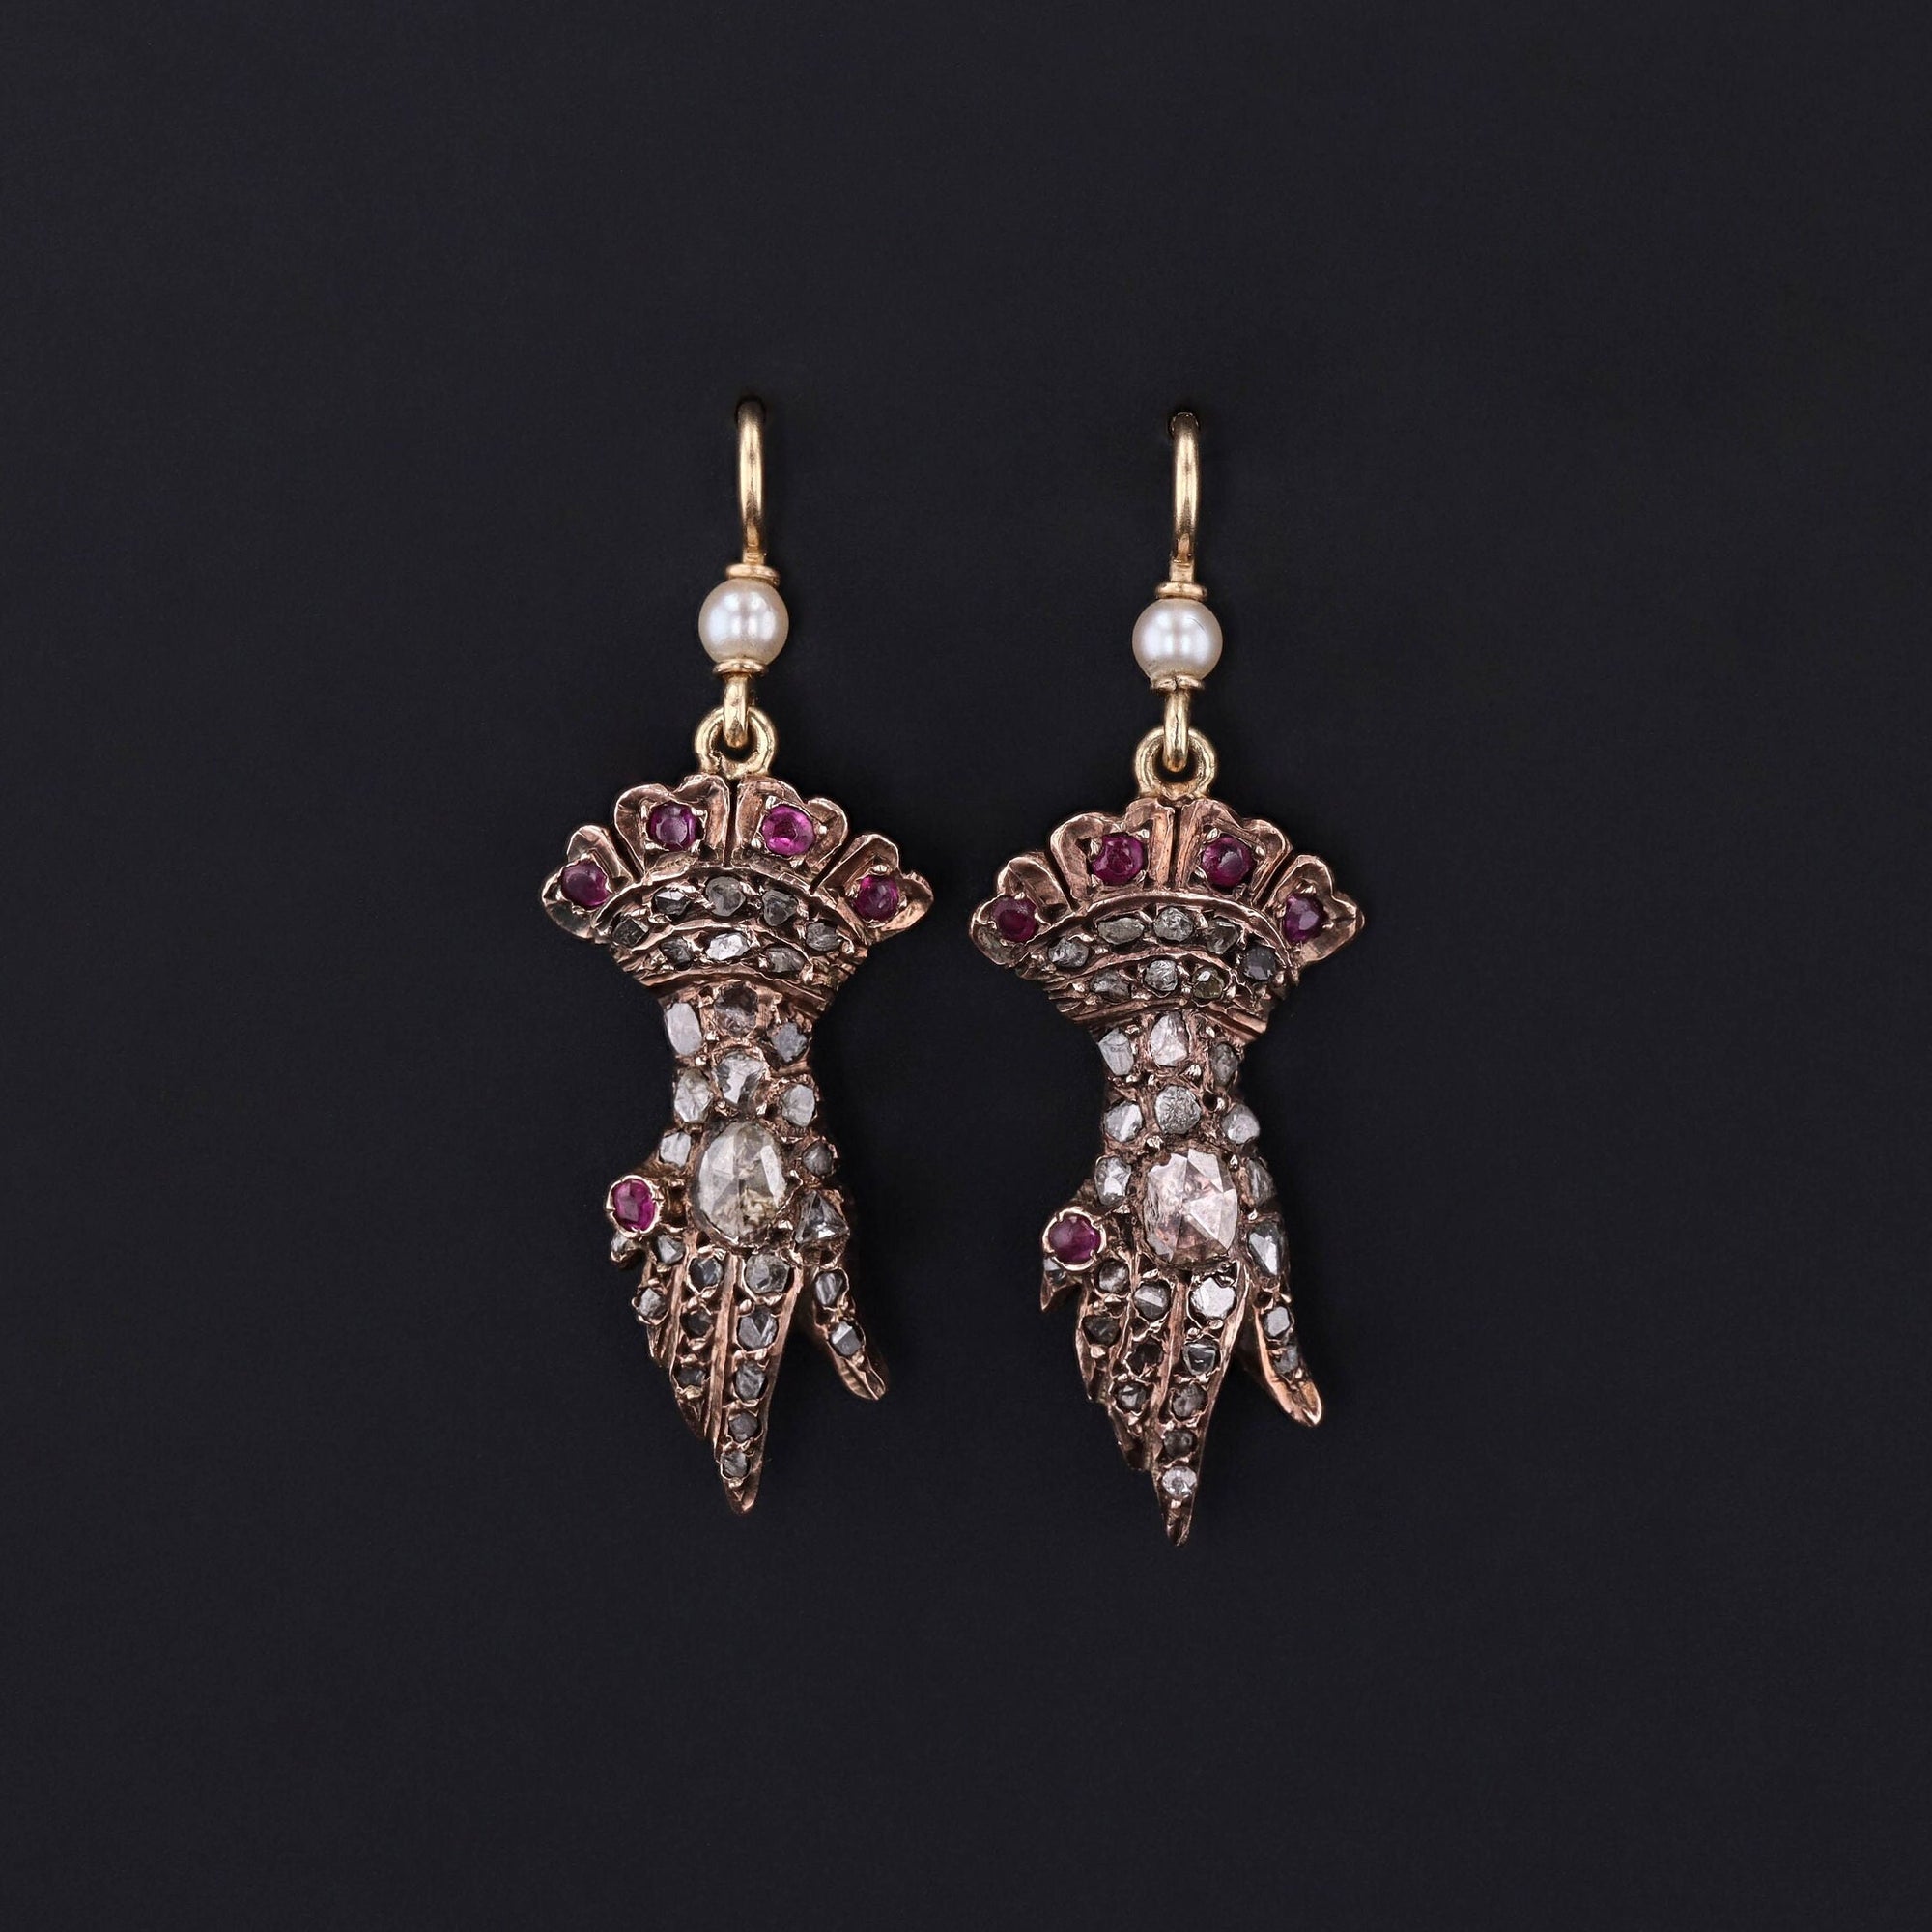 Antique Diamond Hand Earrings with Ruby Accents with 14k Gold Ear Wires